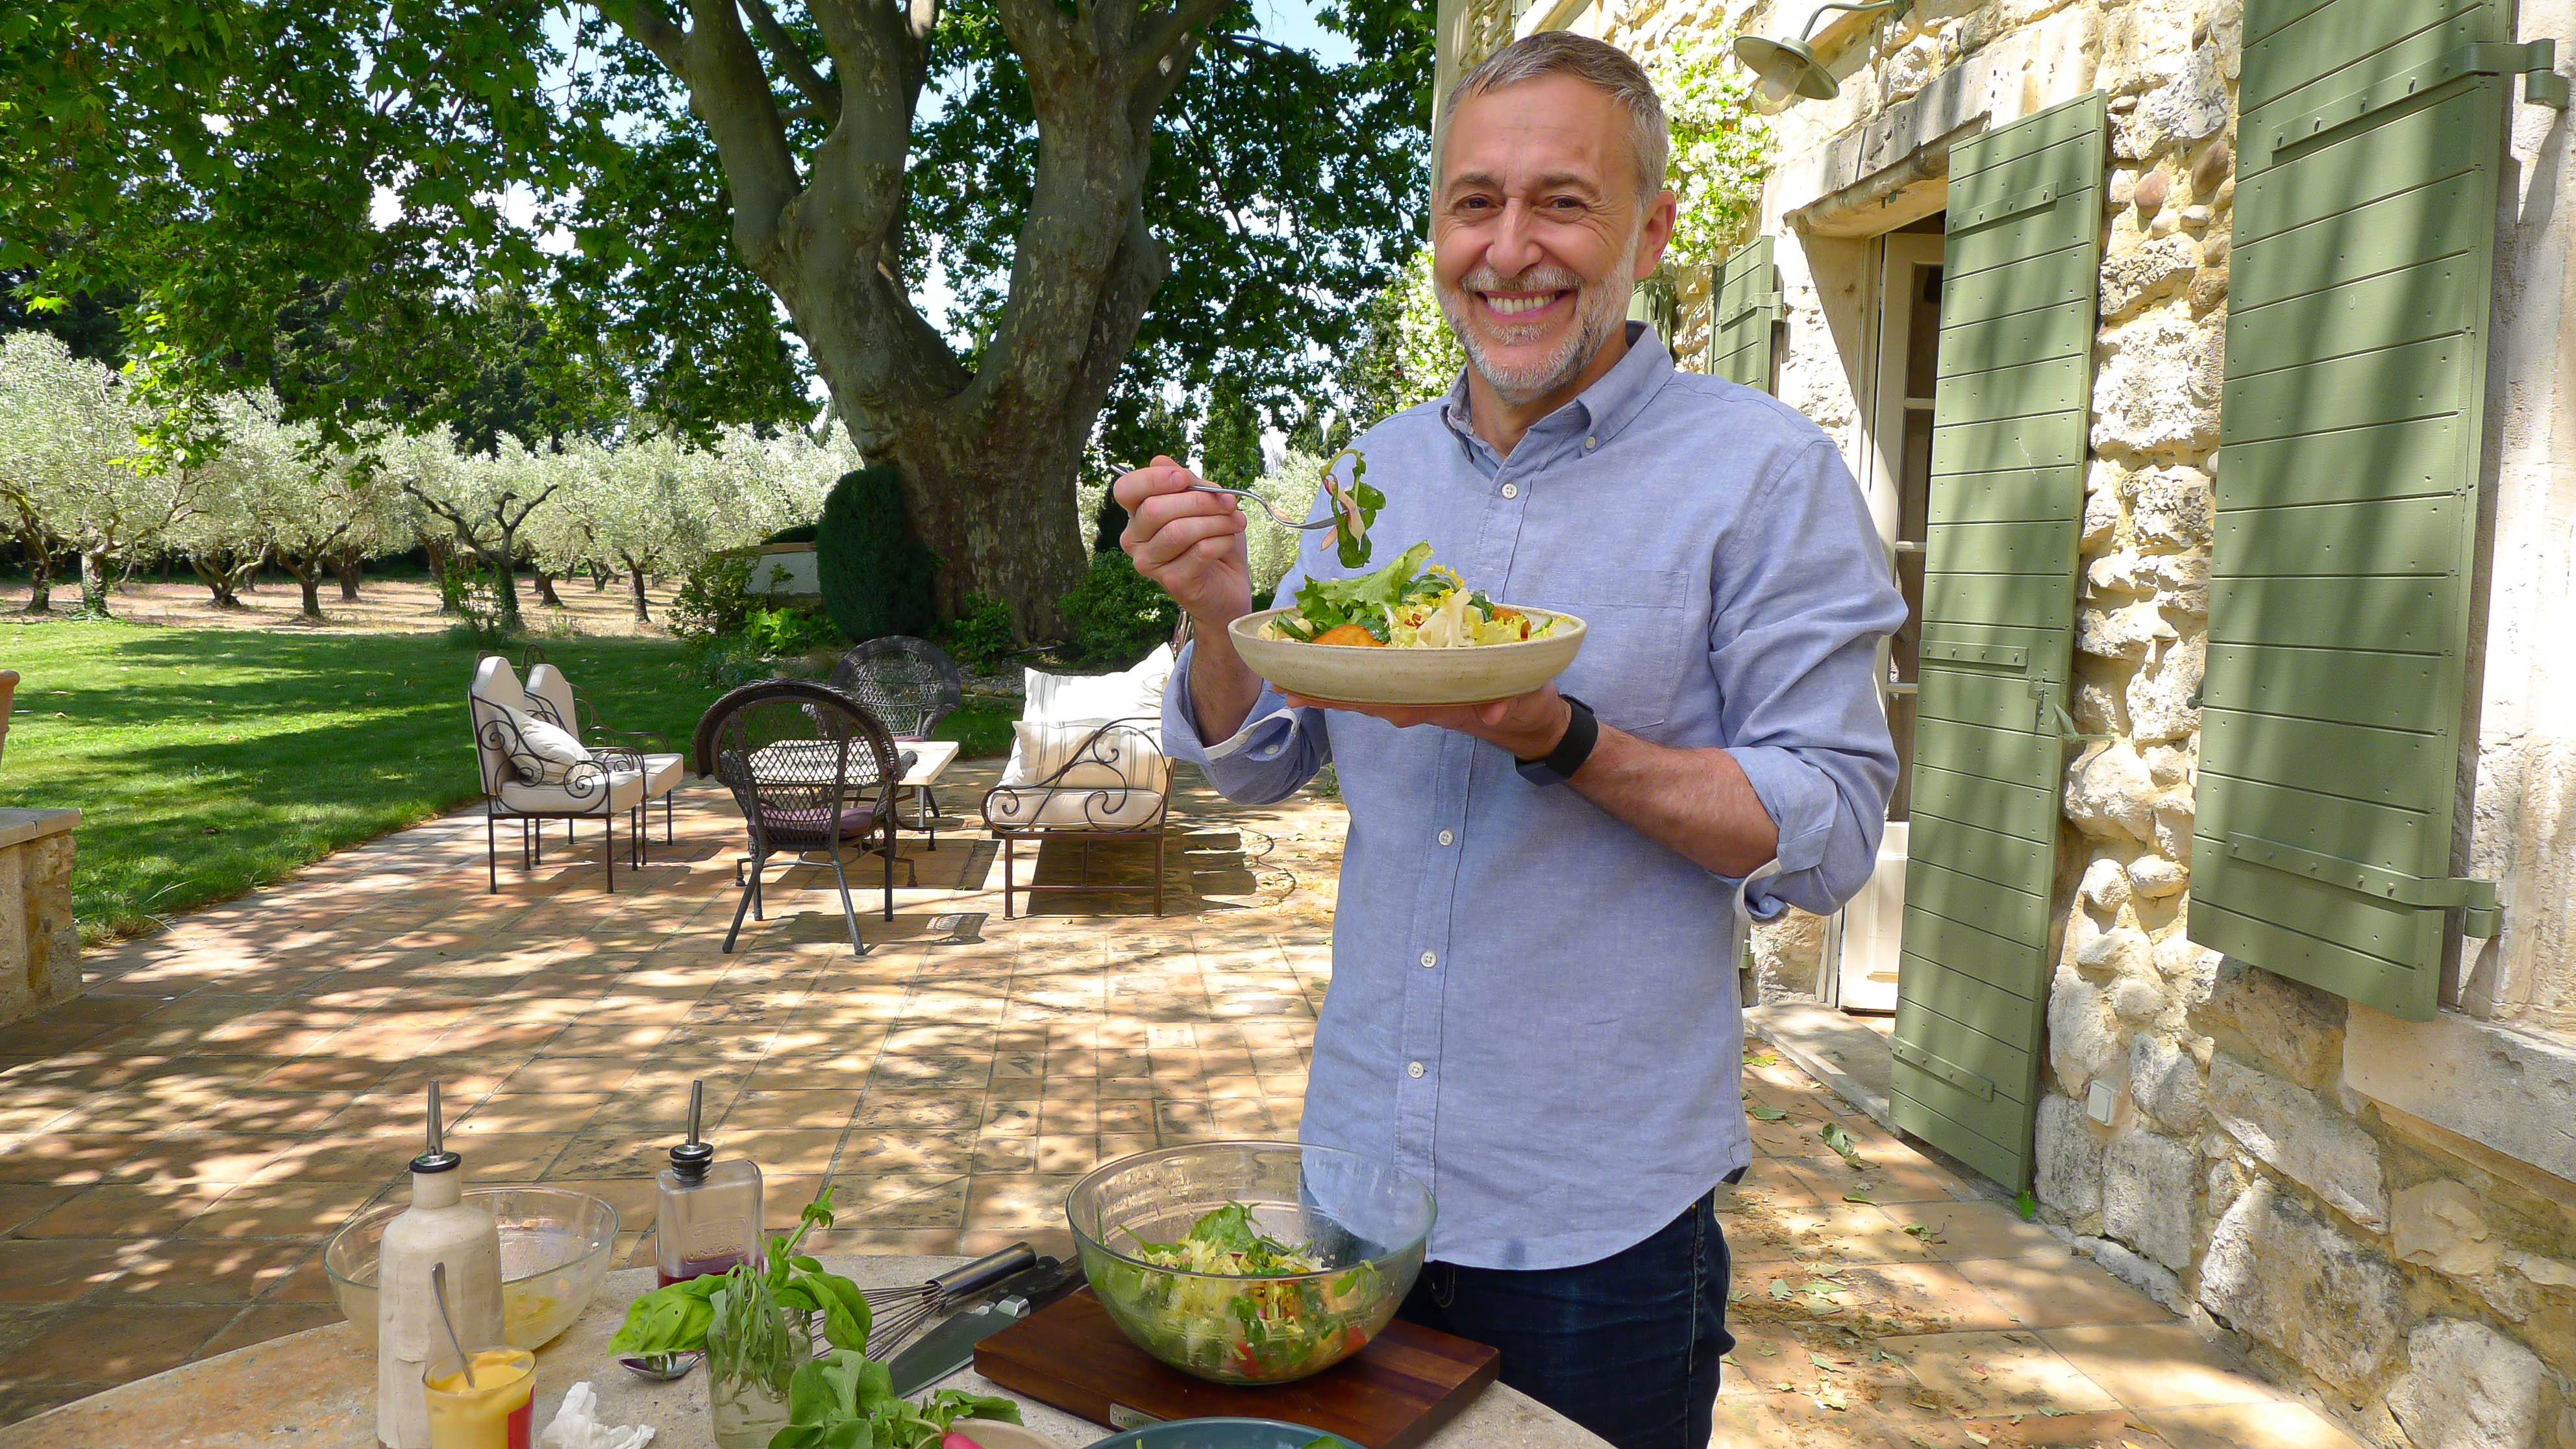 Michel Roux Jr on his TV show ‘Michel Roux’s French Country Cooking’